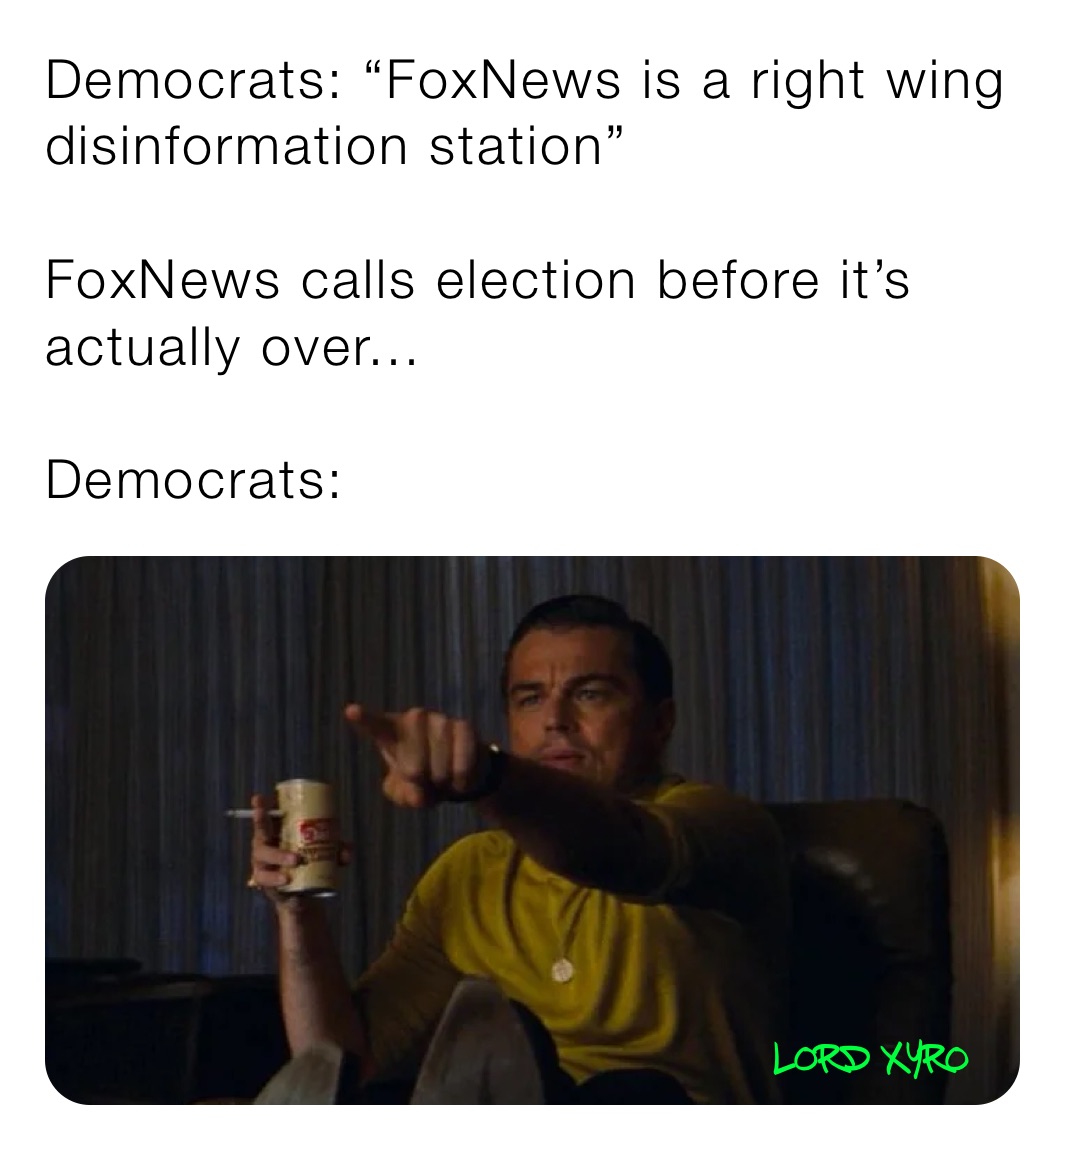 Democrats: “FoxNews is a right wing disinformation station”

FoxNews calls election before it’s actually over...

Democrats: